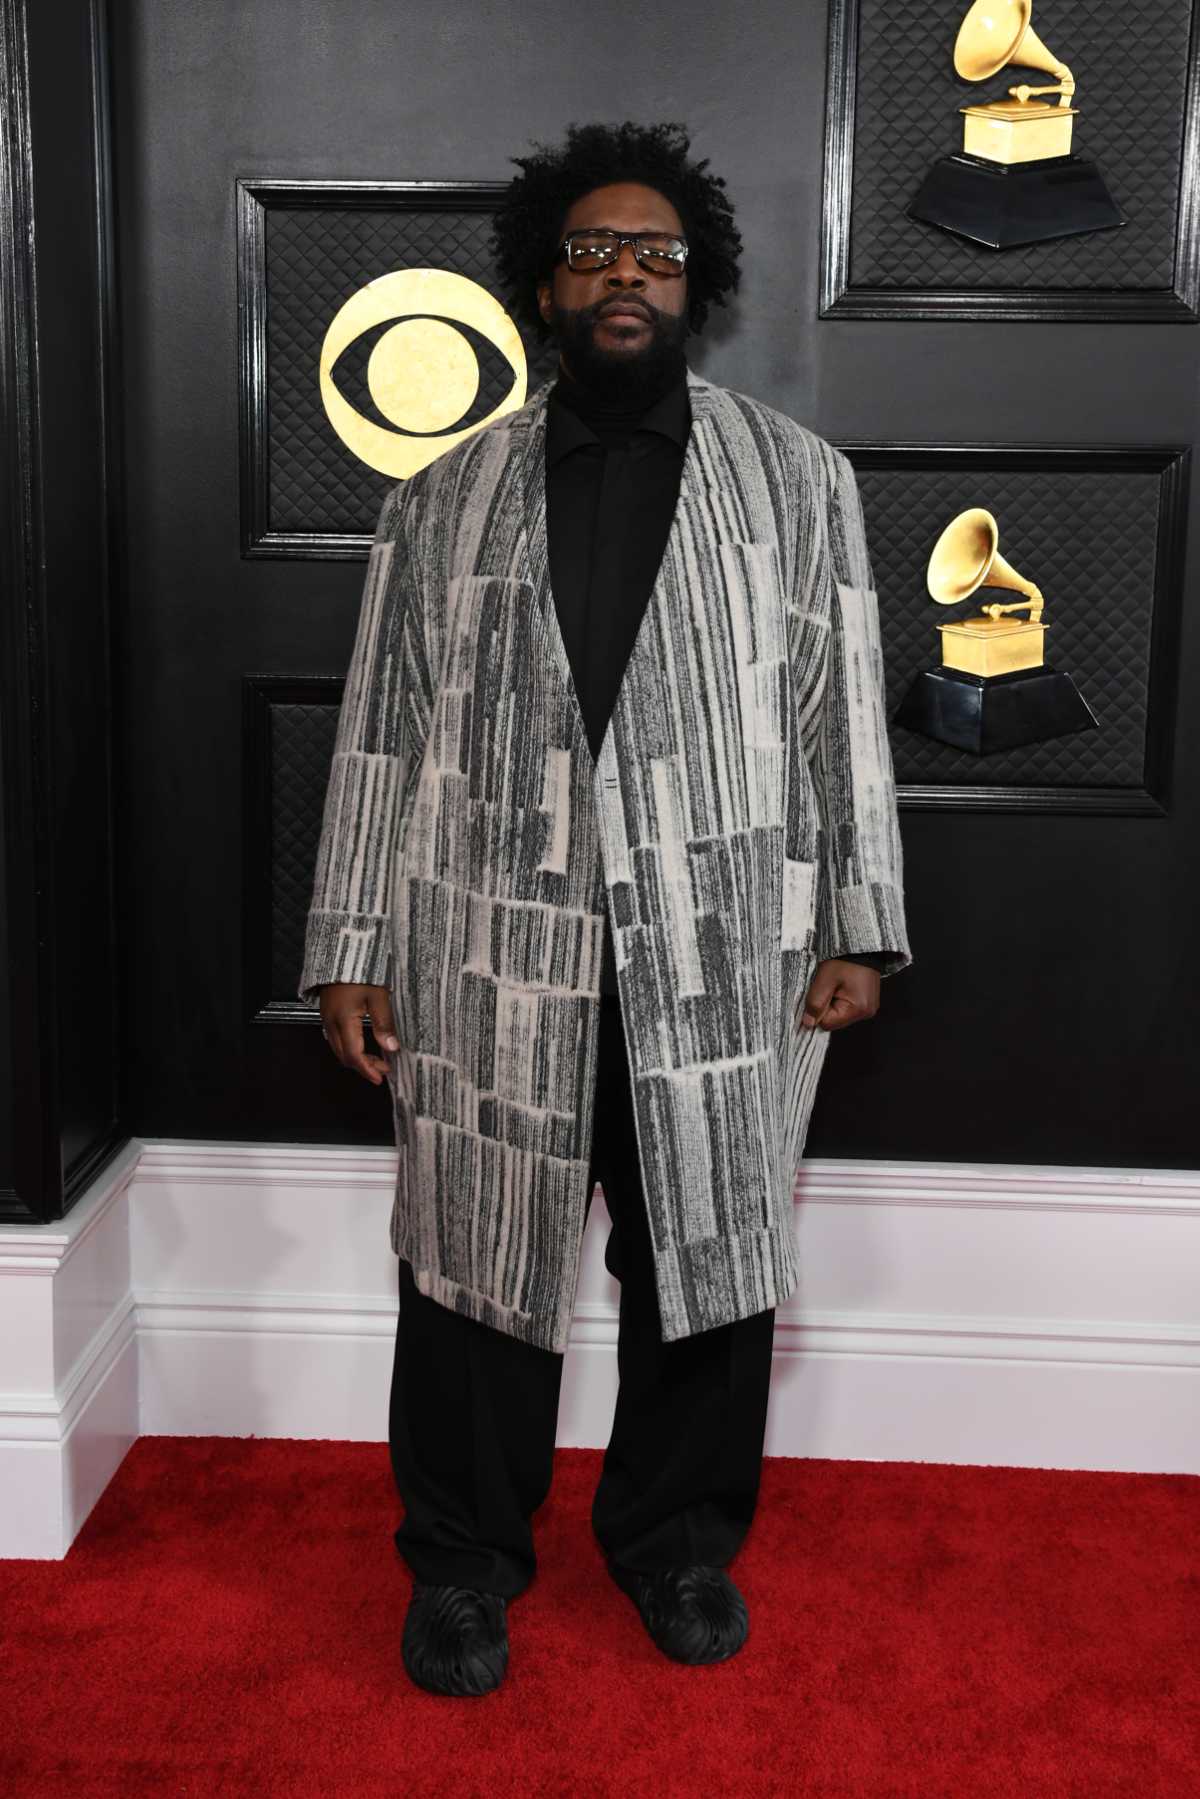 Pusha T And Questlove In ZEGNA At The 65th GRAMMY Awards